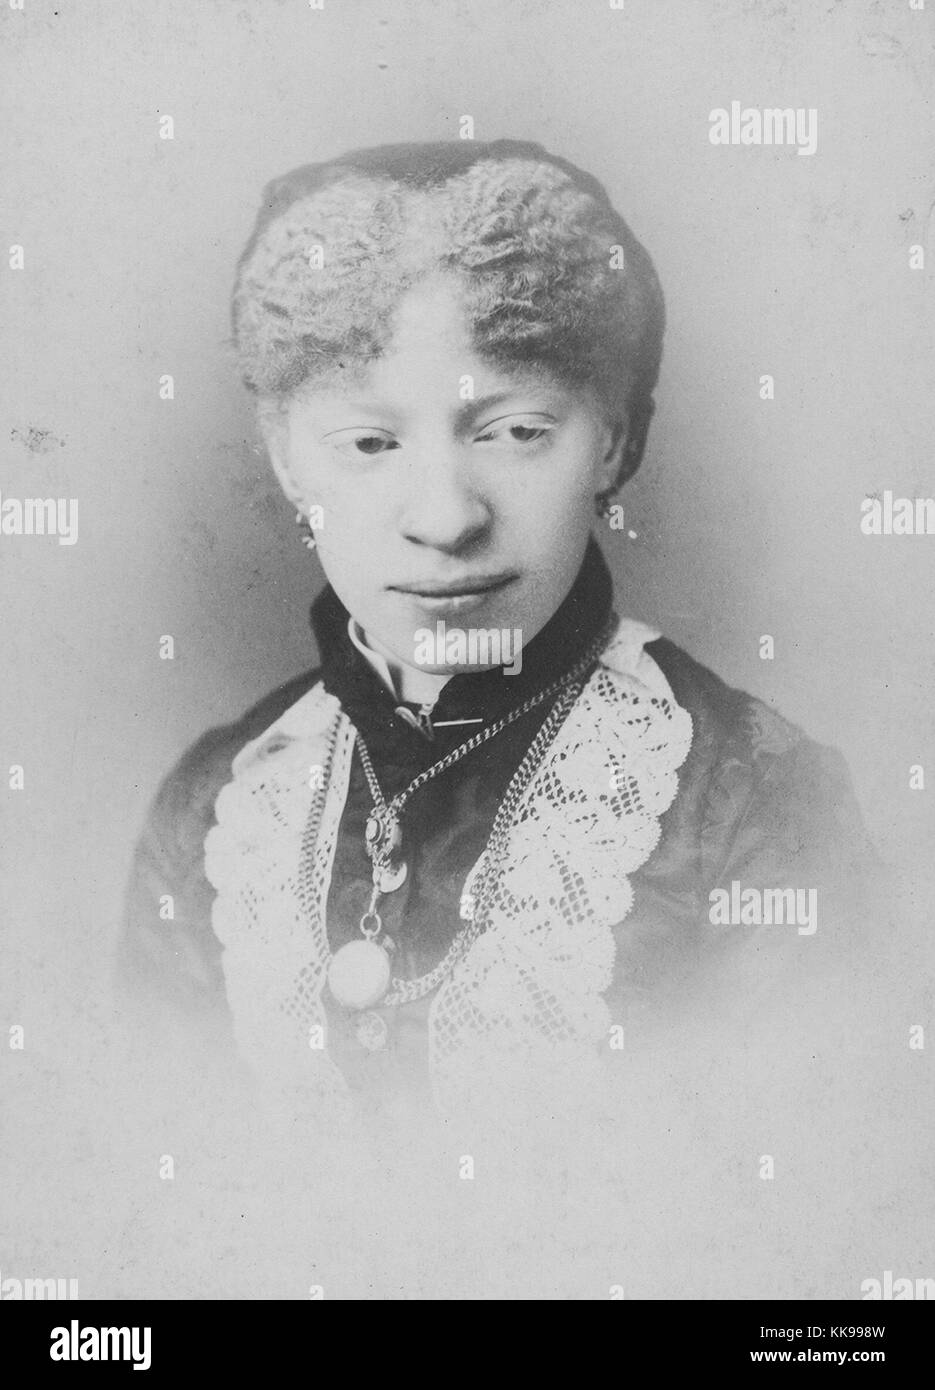 A photographic portrait of a woman identified as Miss Perry, she is an African-American women who has albinism, the condition causes an absence of pigment in her skin, hair and eyes, she is wearing a dark colored dress with white lace accents, she also wears several necklaces, 1900. From the New York Public Library. Stock Photo